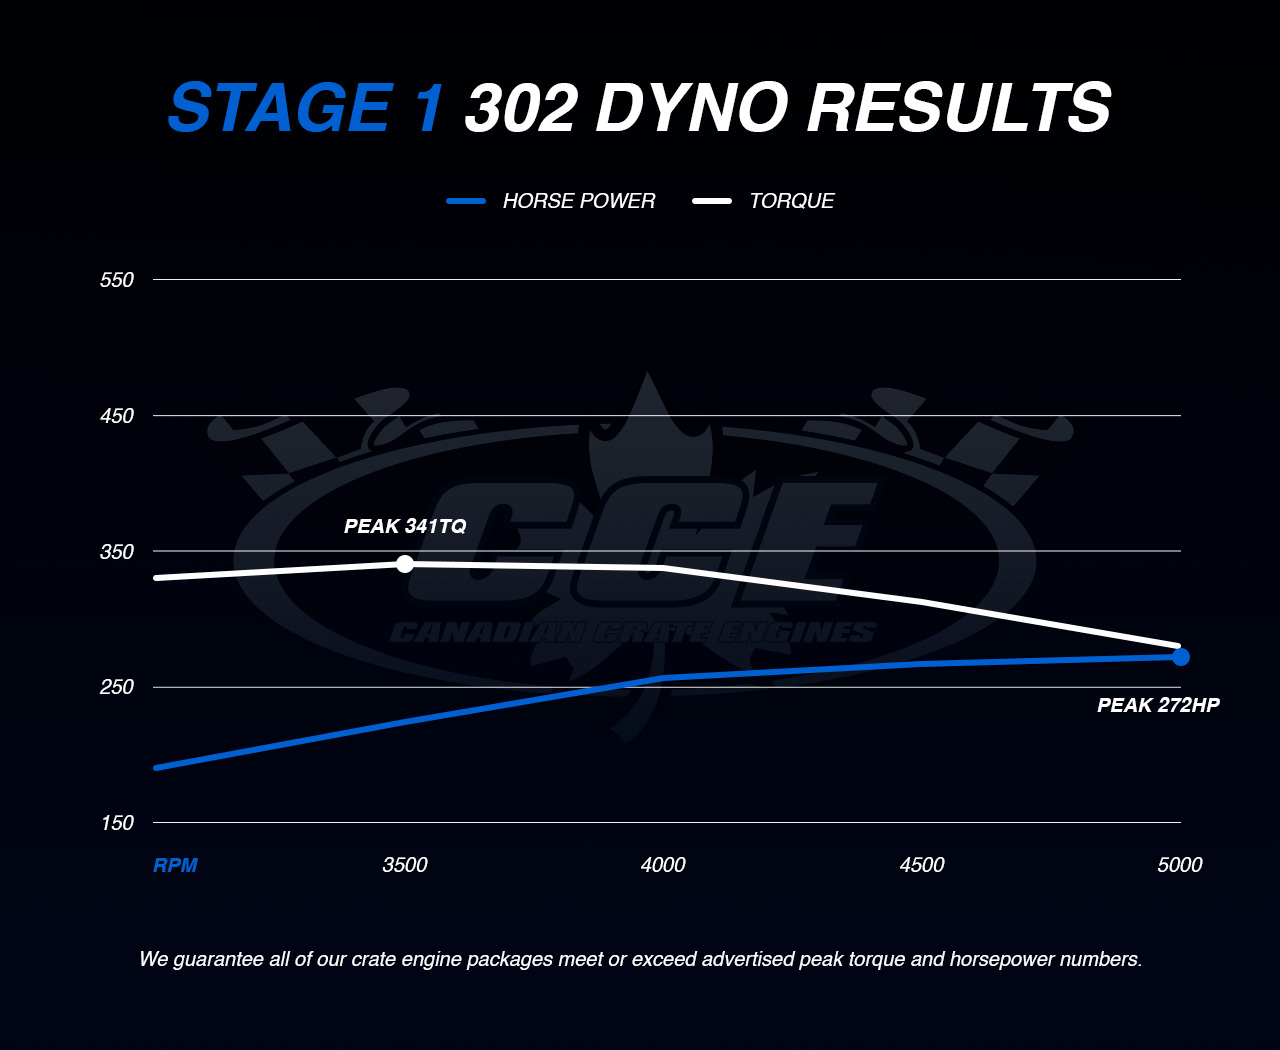 Dyno Graph Results for Ford Stage 1 showing peak torque of 341TQ and peak horsepower of 272HP